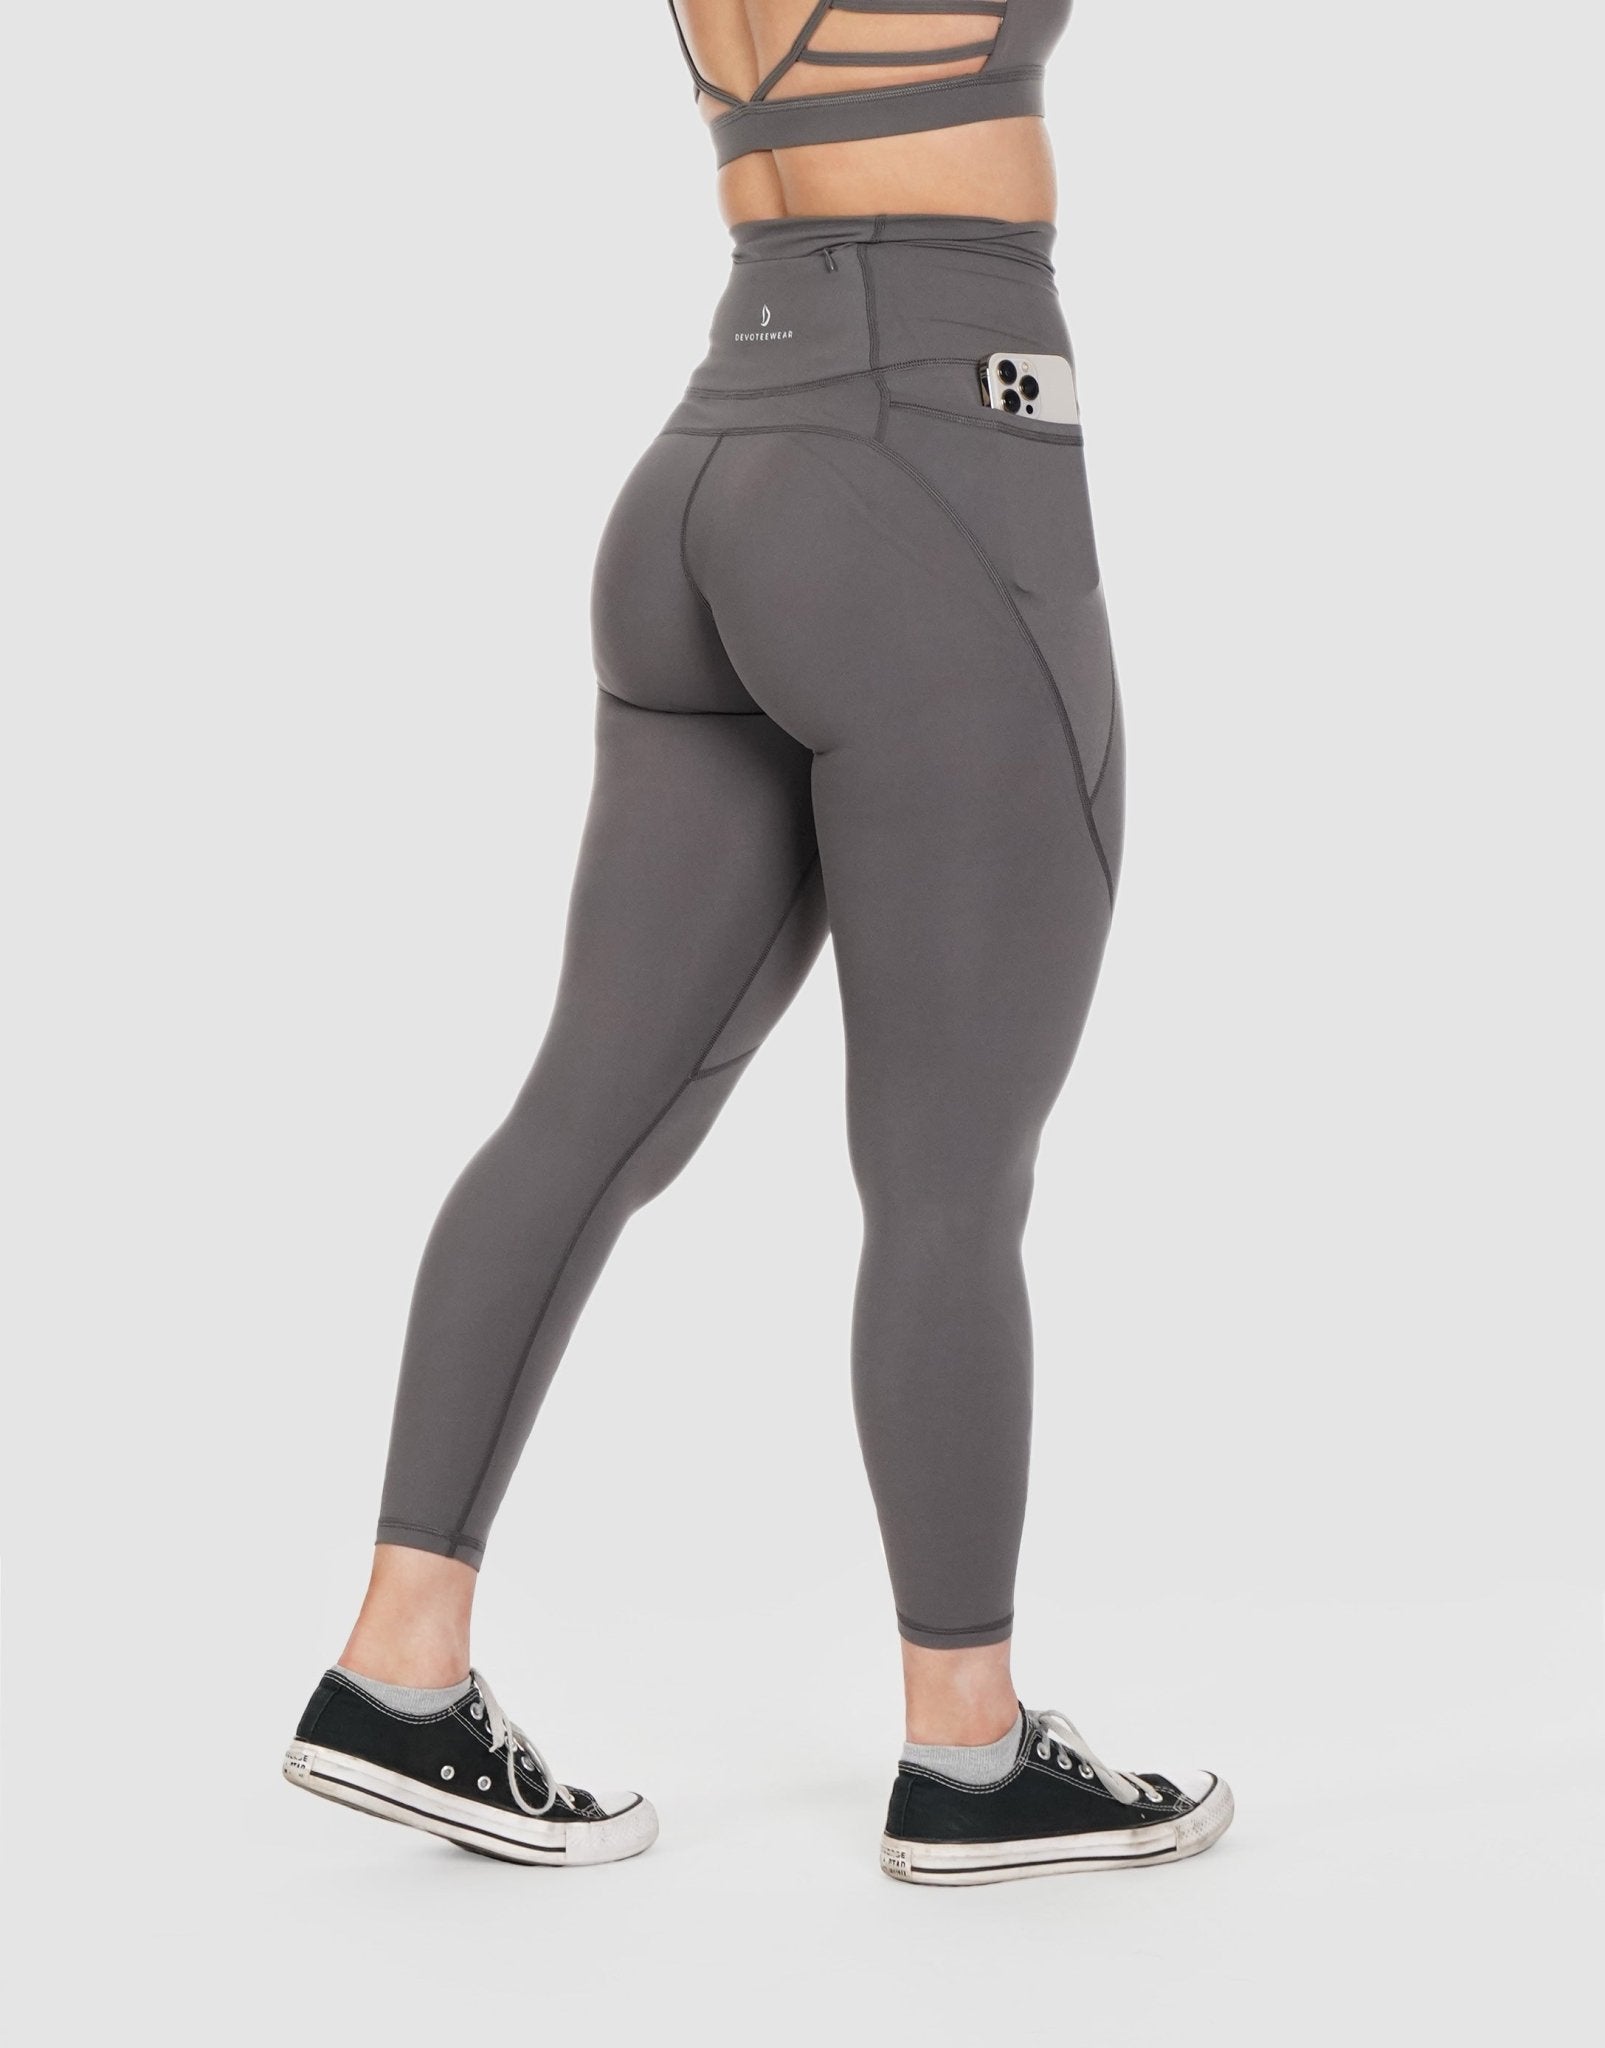 Scrunch Butt Leggings With Flap Pockets , Gym and Active Leggings for Women  , Yoga Pants , Light Blue Leggings , Pocket Leggings, Fit Wear -   Singapore